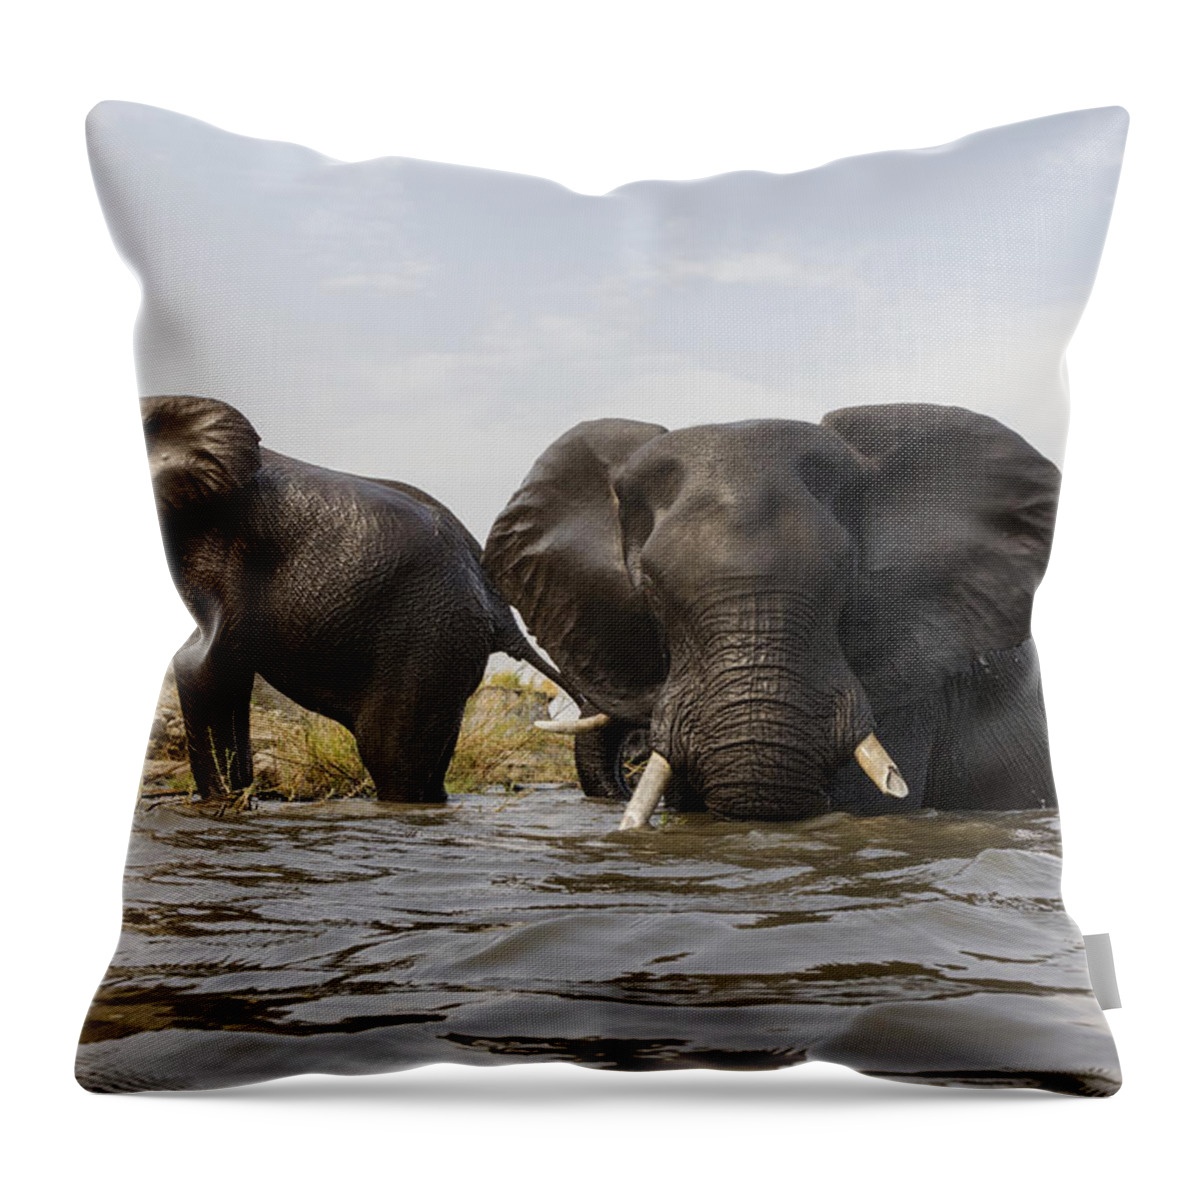 Vincent Grafhorst Throw Pillow featuring the photograph African Elephants In The Chobe River by Vincent Grafhorst